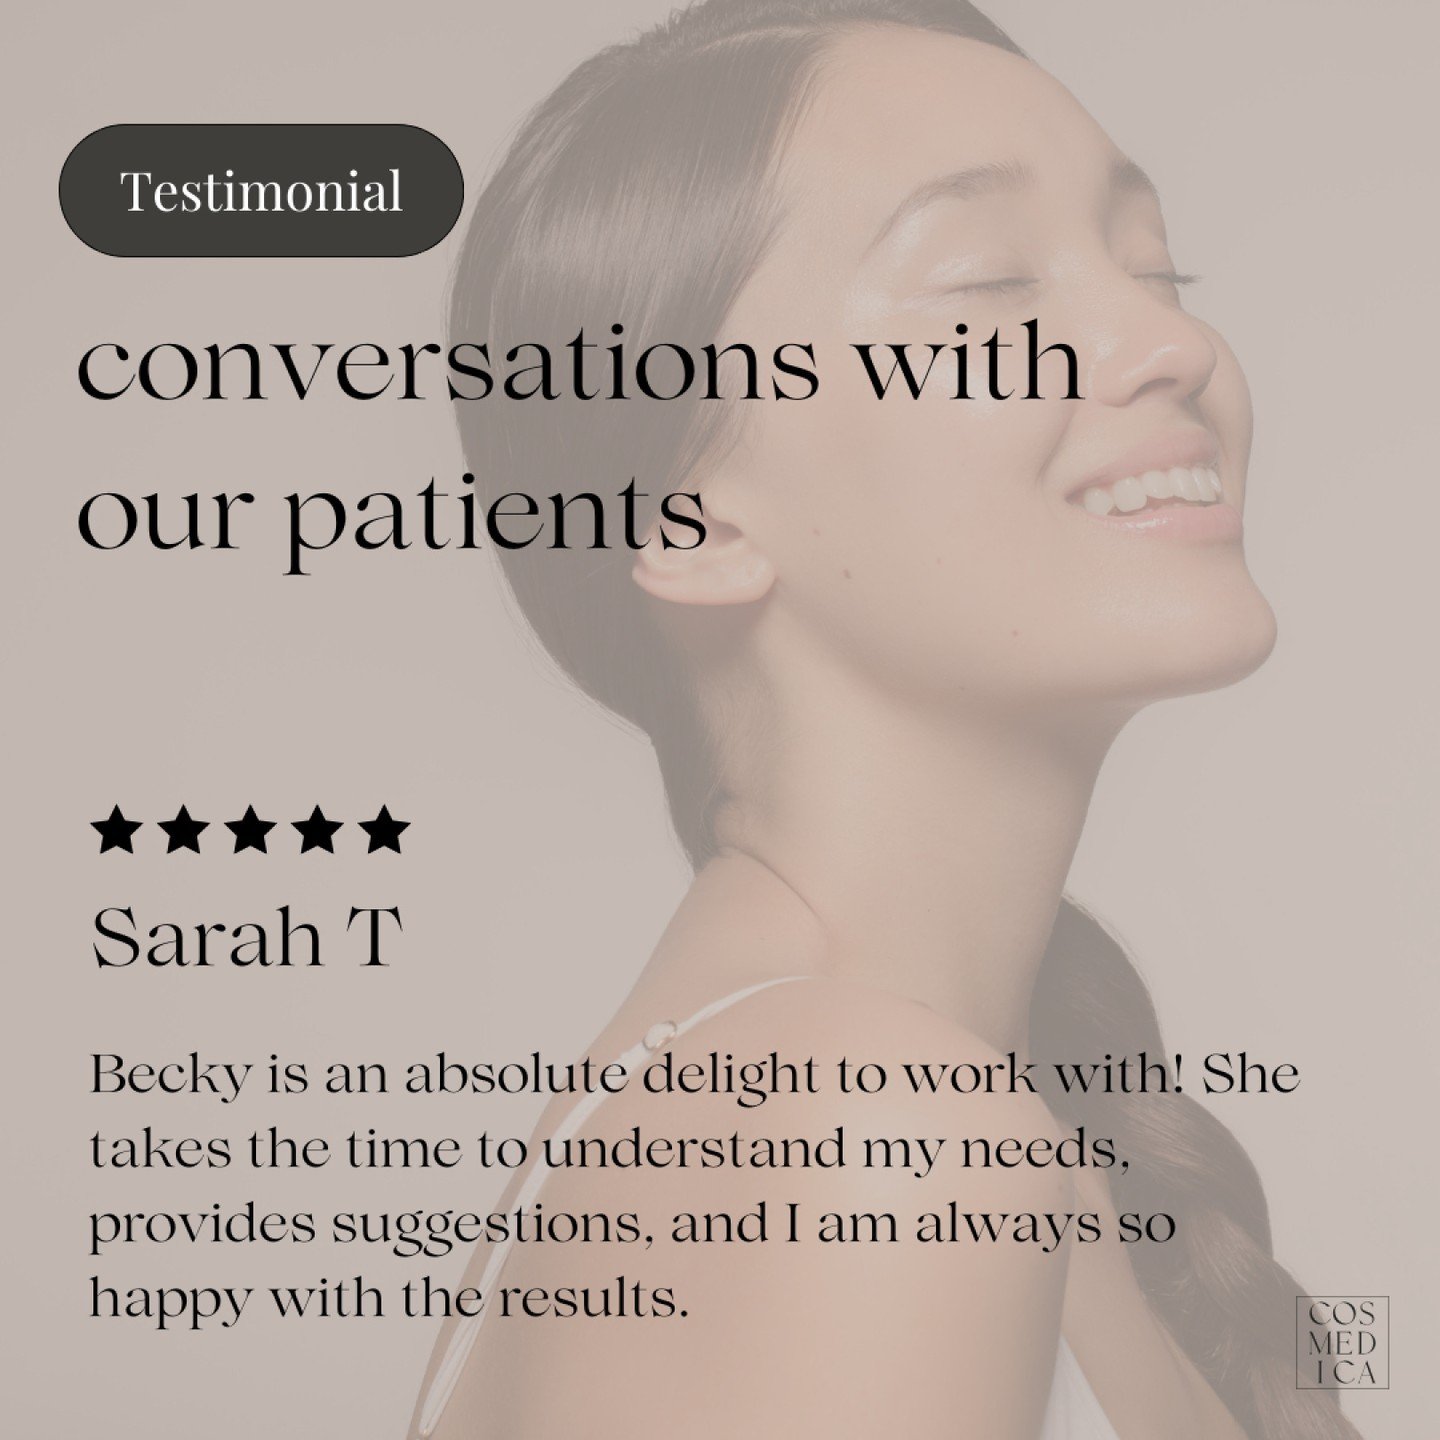 Another lovely conversation with one of our beautiful patients. 

#testimonial #customerreview #clinicreview #skincare #results #5starreview #patientfeedback #feedbackfromourpatient #botox #filler #laser #laserclinic #cosmeticclinic #burlingtonclinic